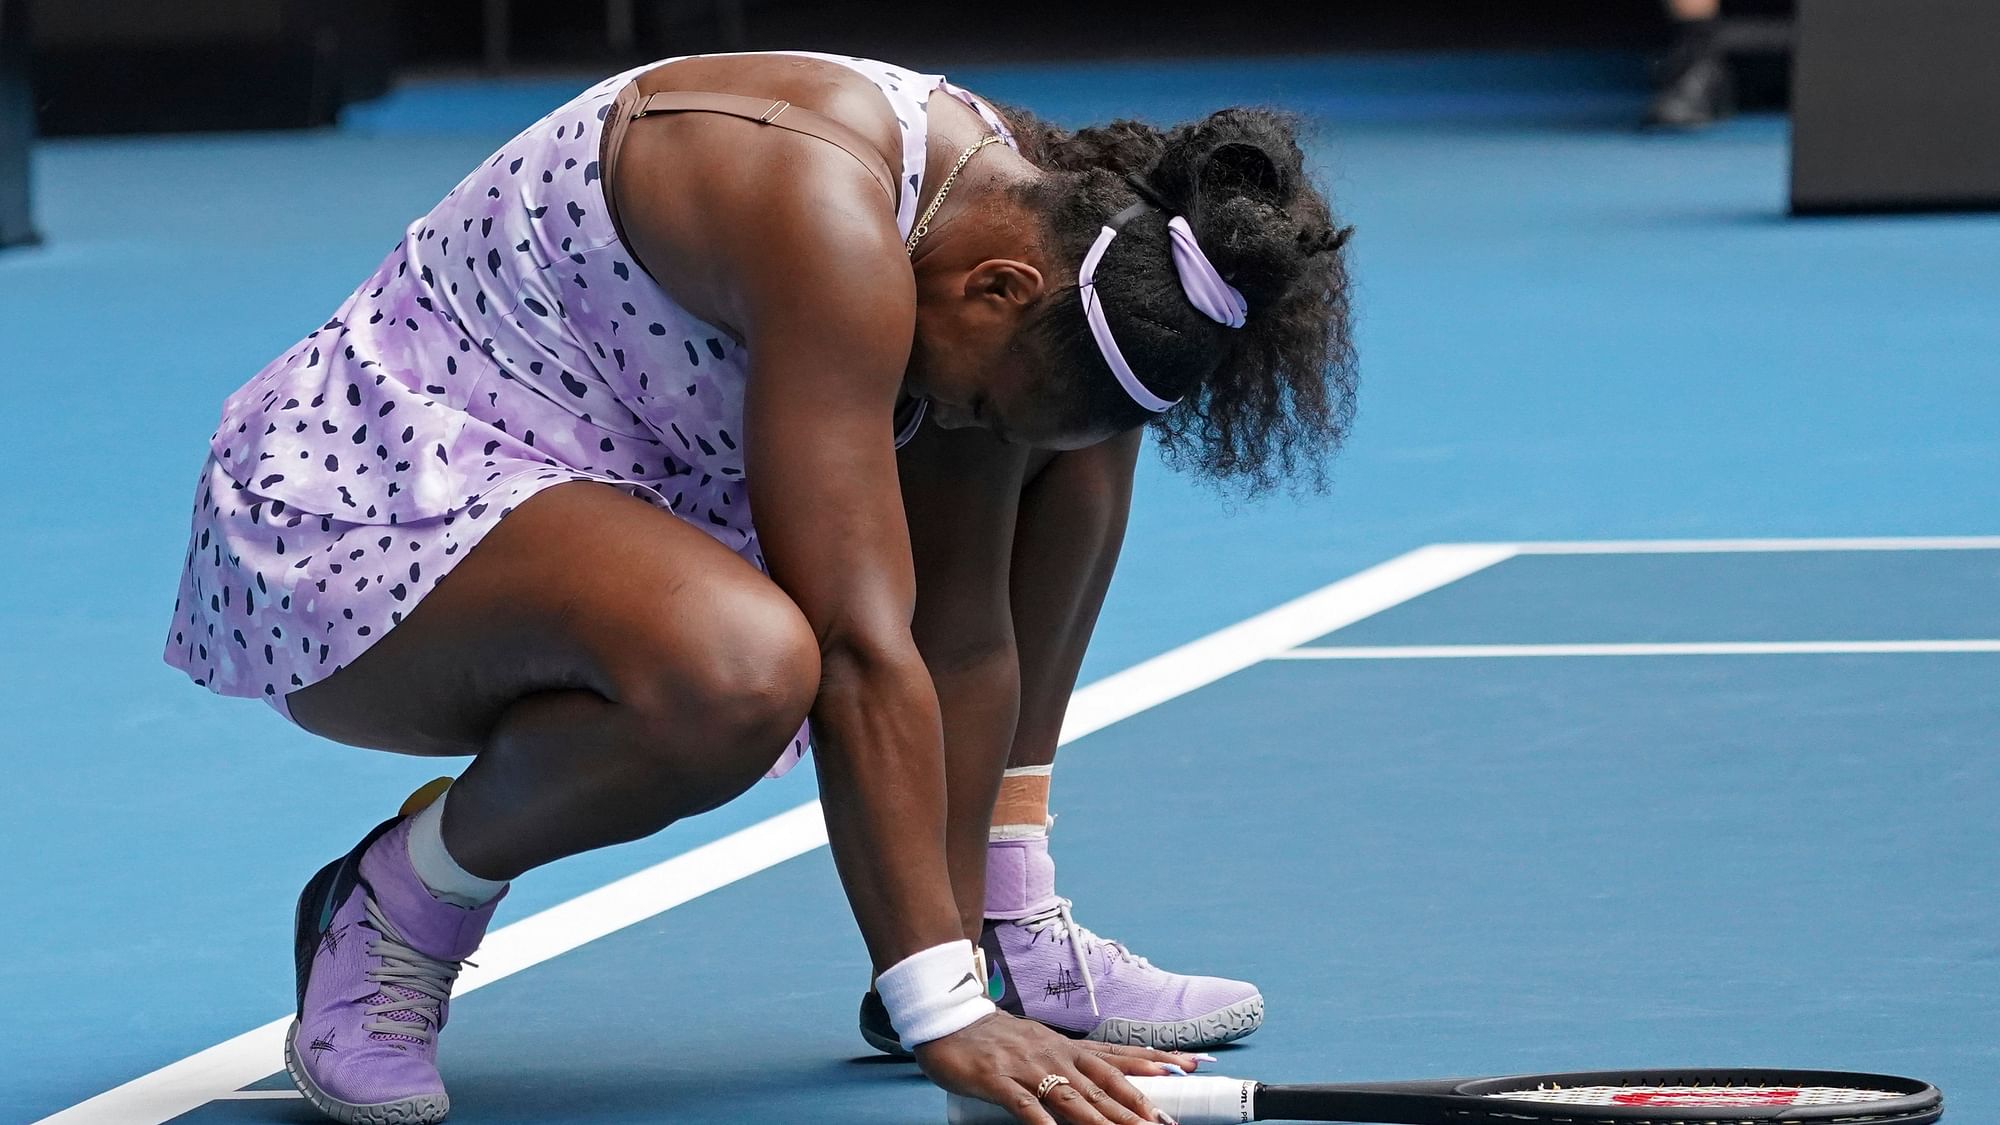 Serena Williams has been knocked out of the 2020 Australian Open